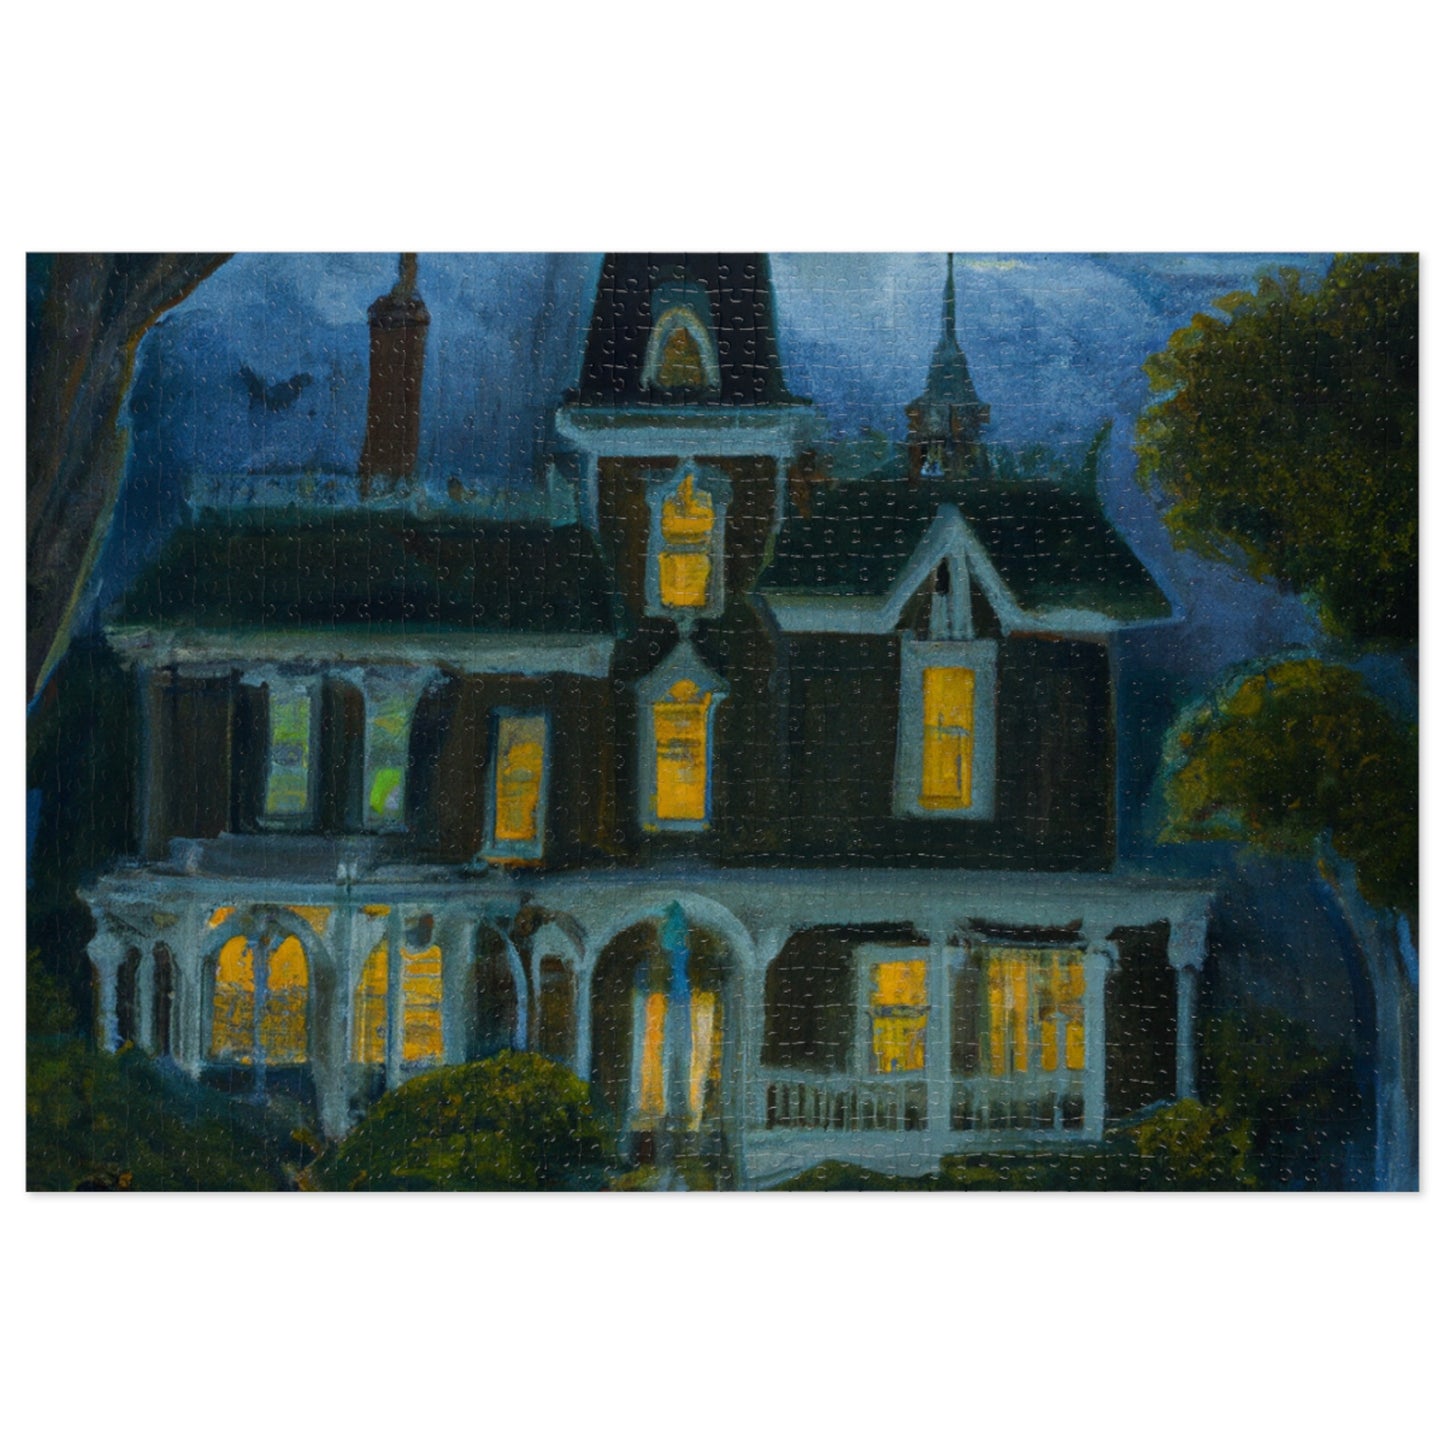 The Haunted Mansion - JigSaw Puzzle 1000 Piece: Giles Conroyeaux - Halloween Gift | Spooky Scenes